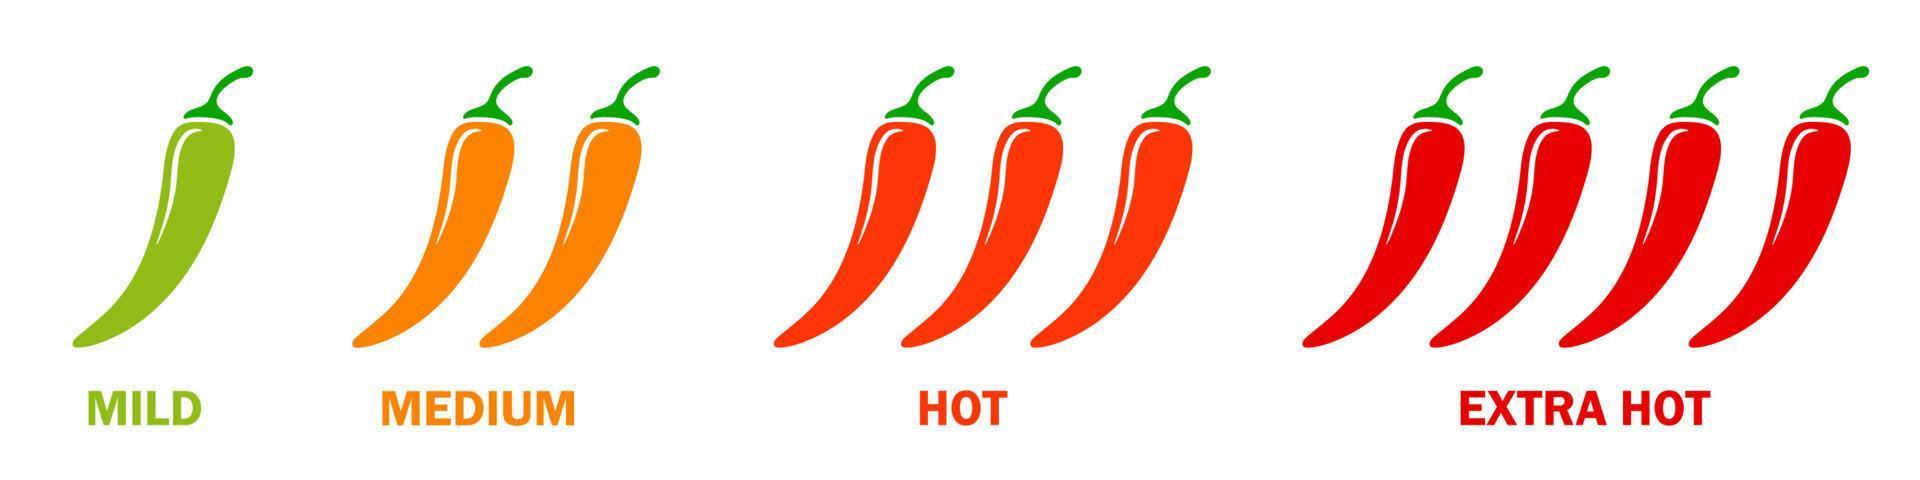 Scoville pepper heat scale from low to very spicy hot. flat vector